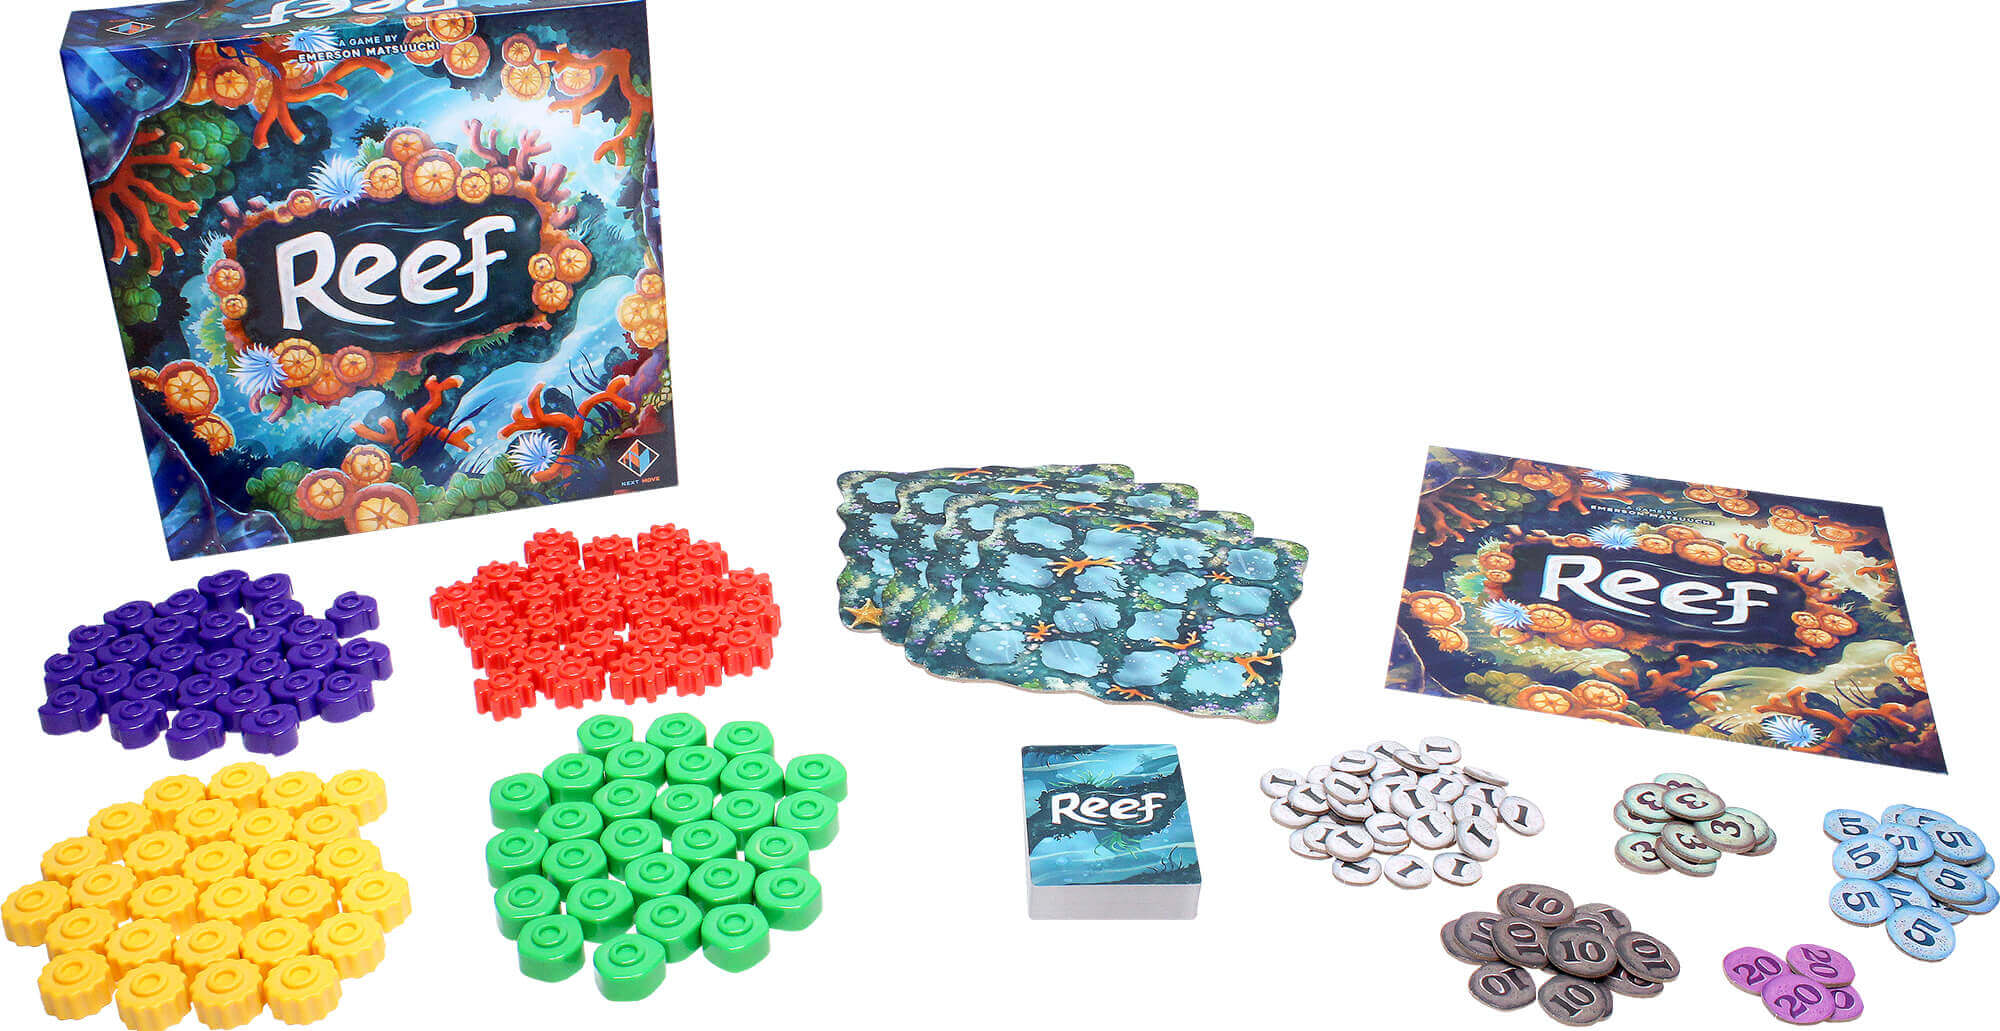 Reef Board Game Components